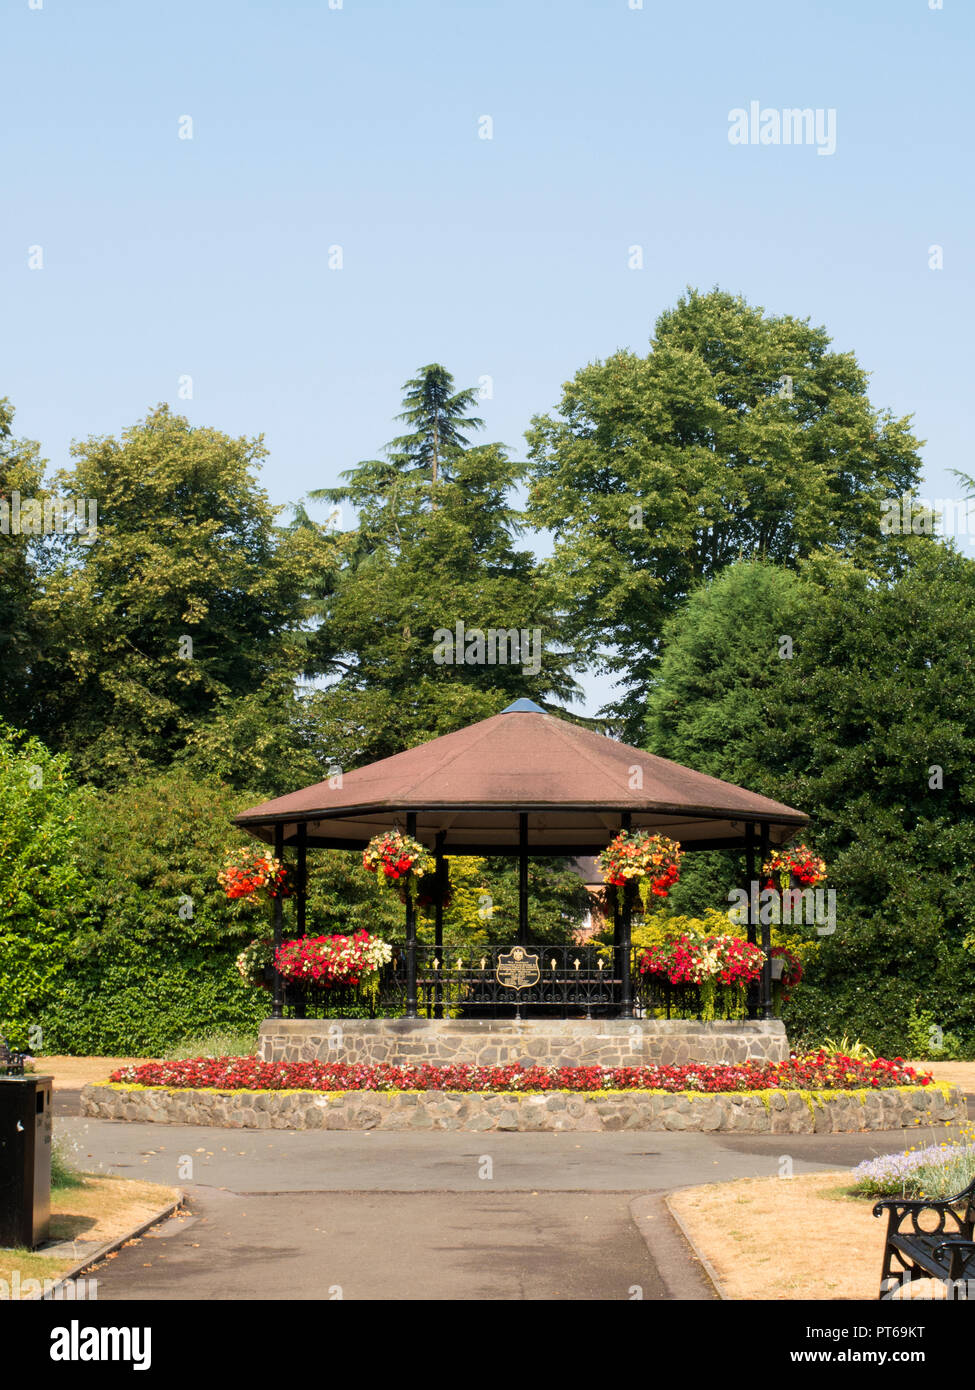 Band stand Queens Park Loughborough Stock Photo